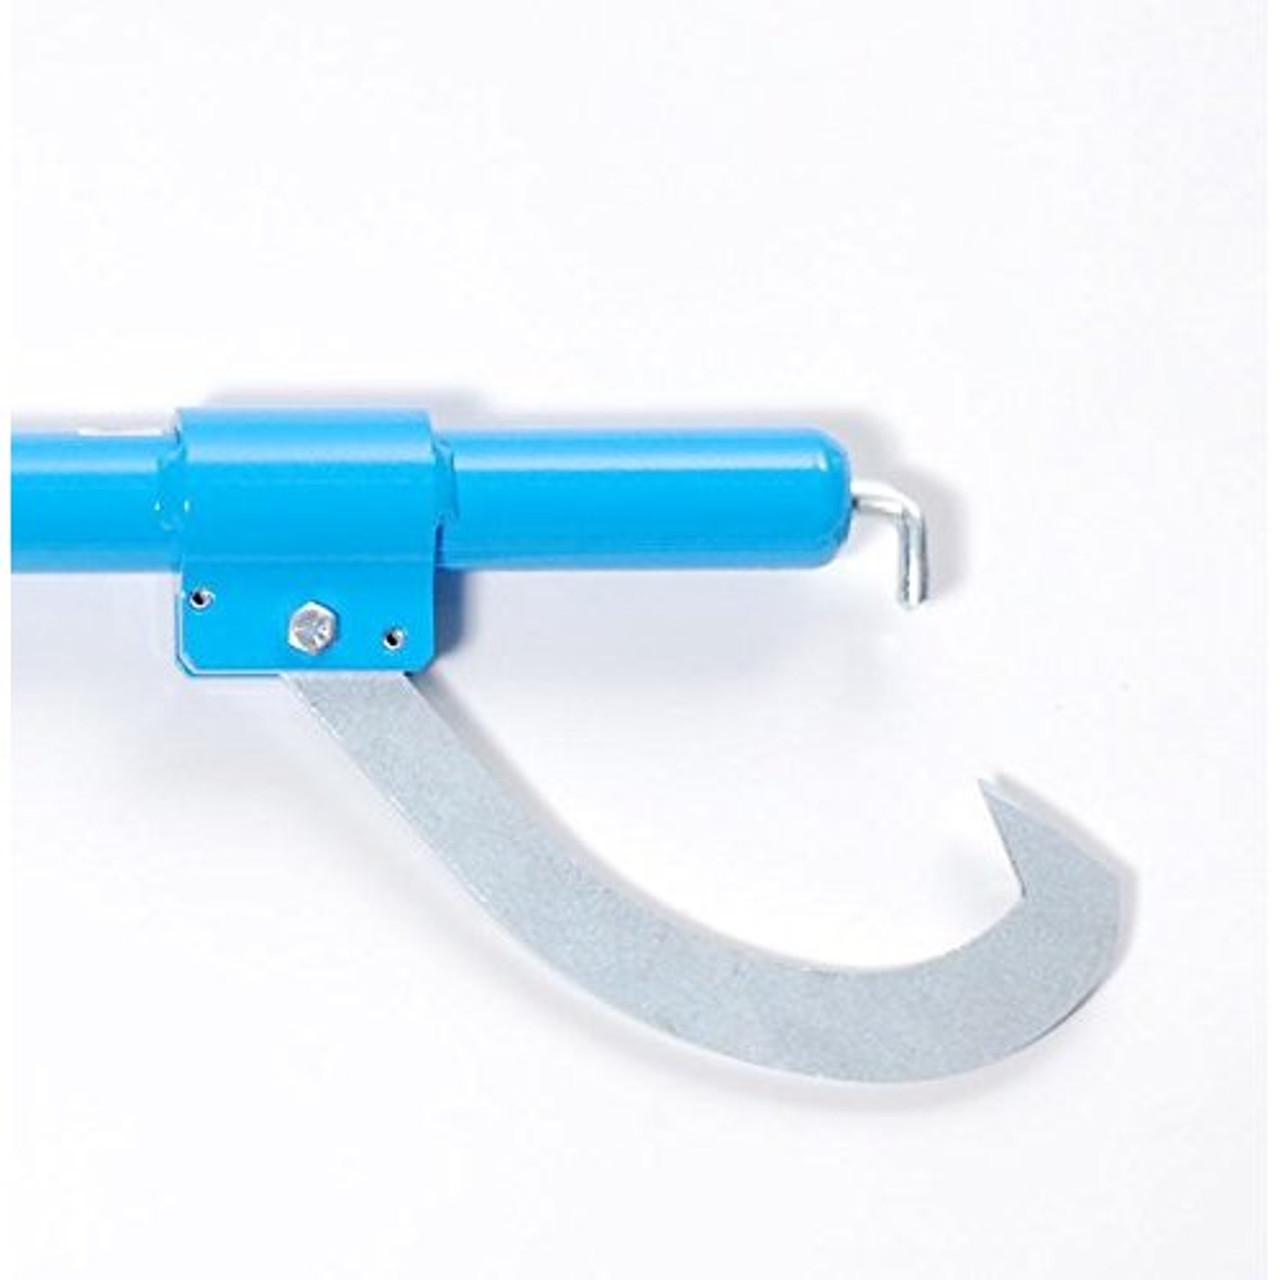 LogRite CH024 24" Aluminum Handle Cant Hook